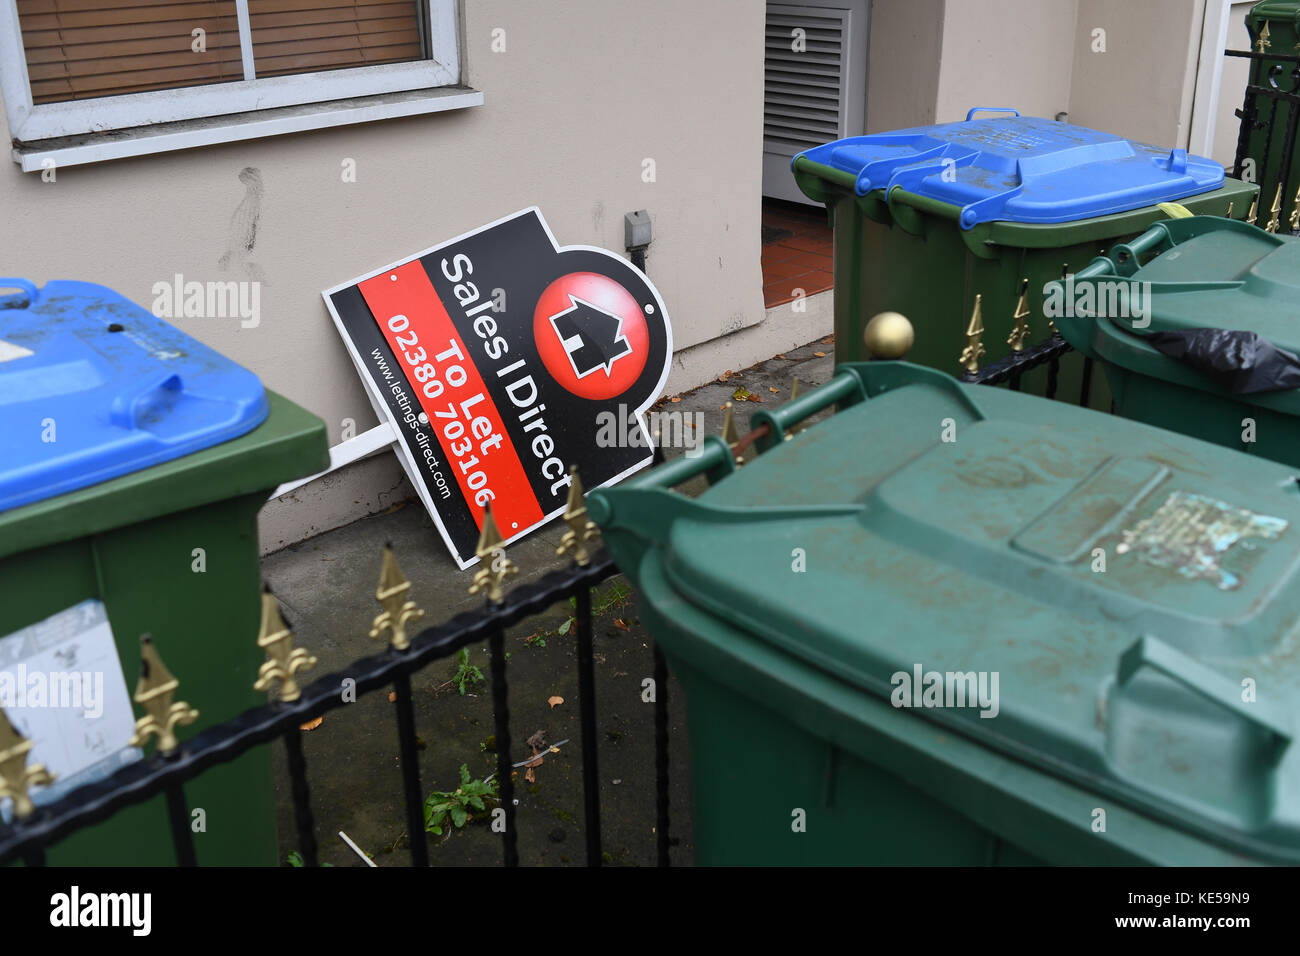 Sales direct To let sign dumped behind bins outside house. Stock Photo